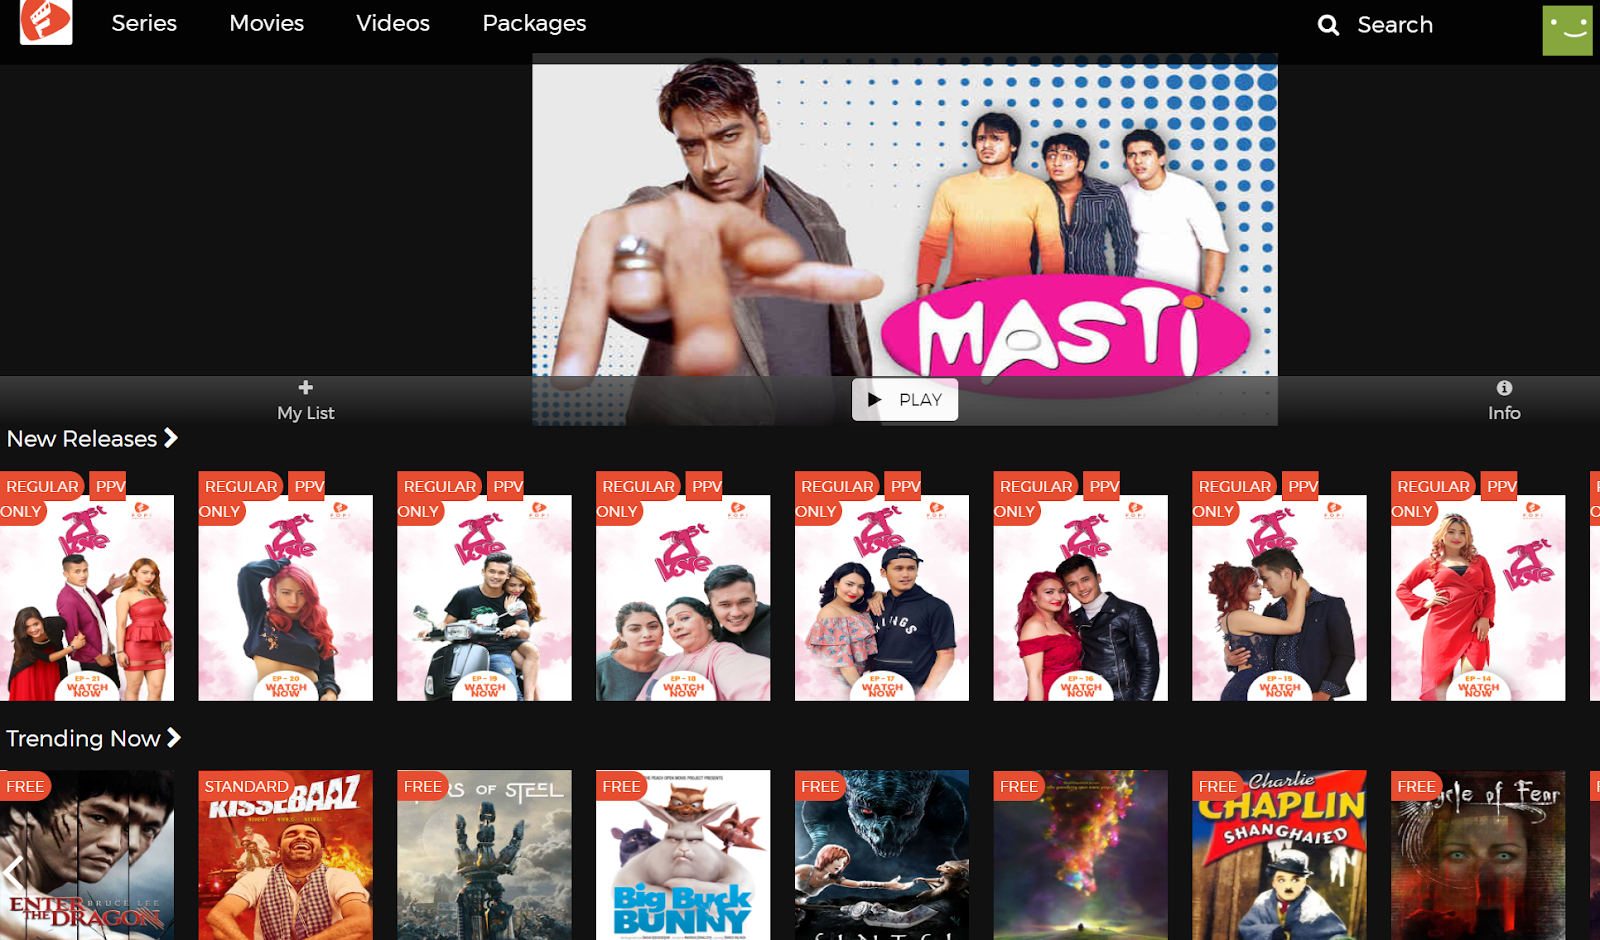 use this webmyfopi.com to watch nepali movies